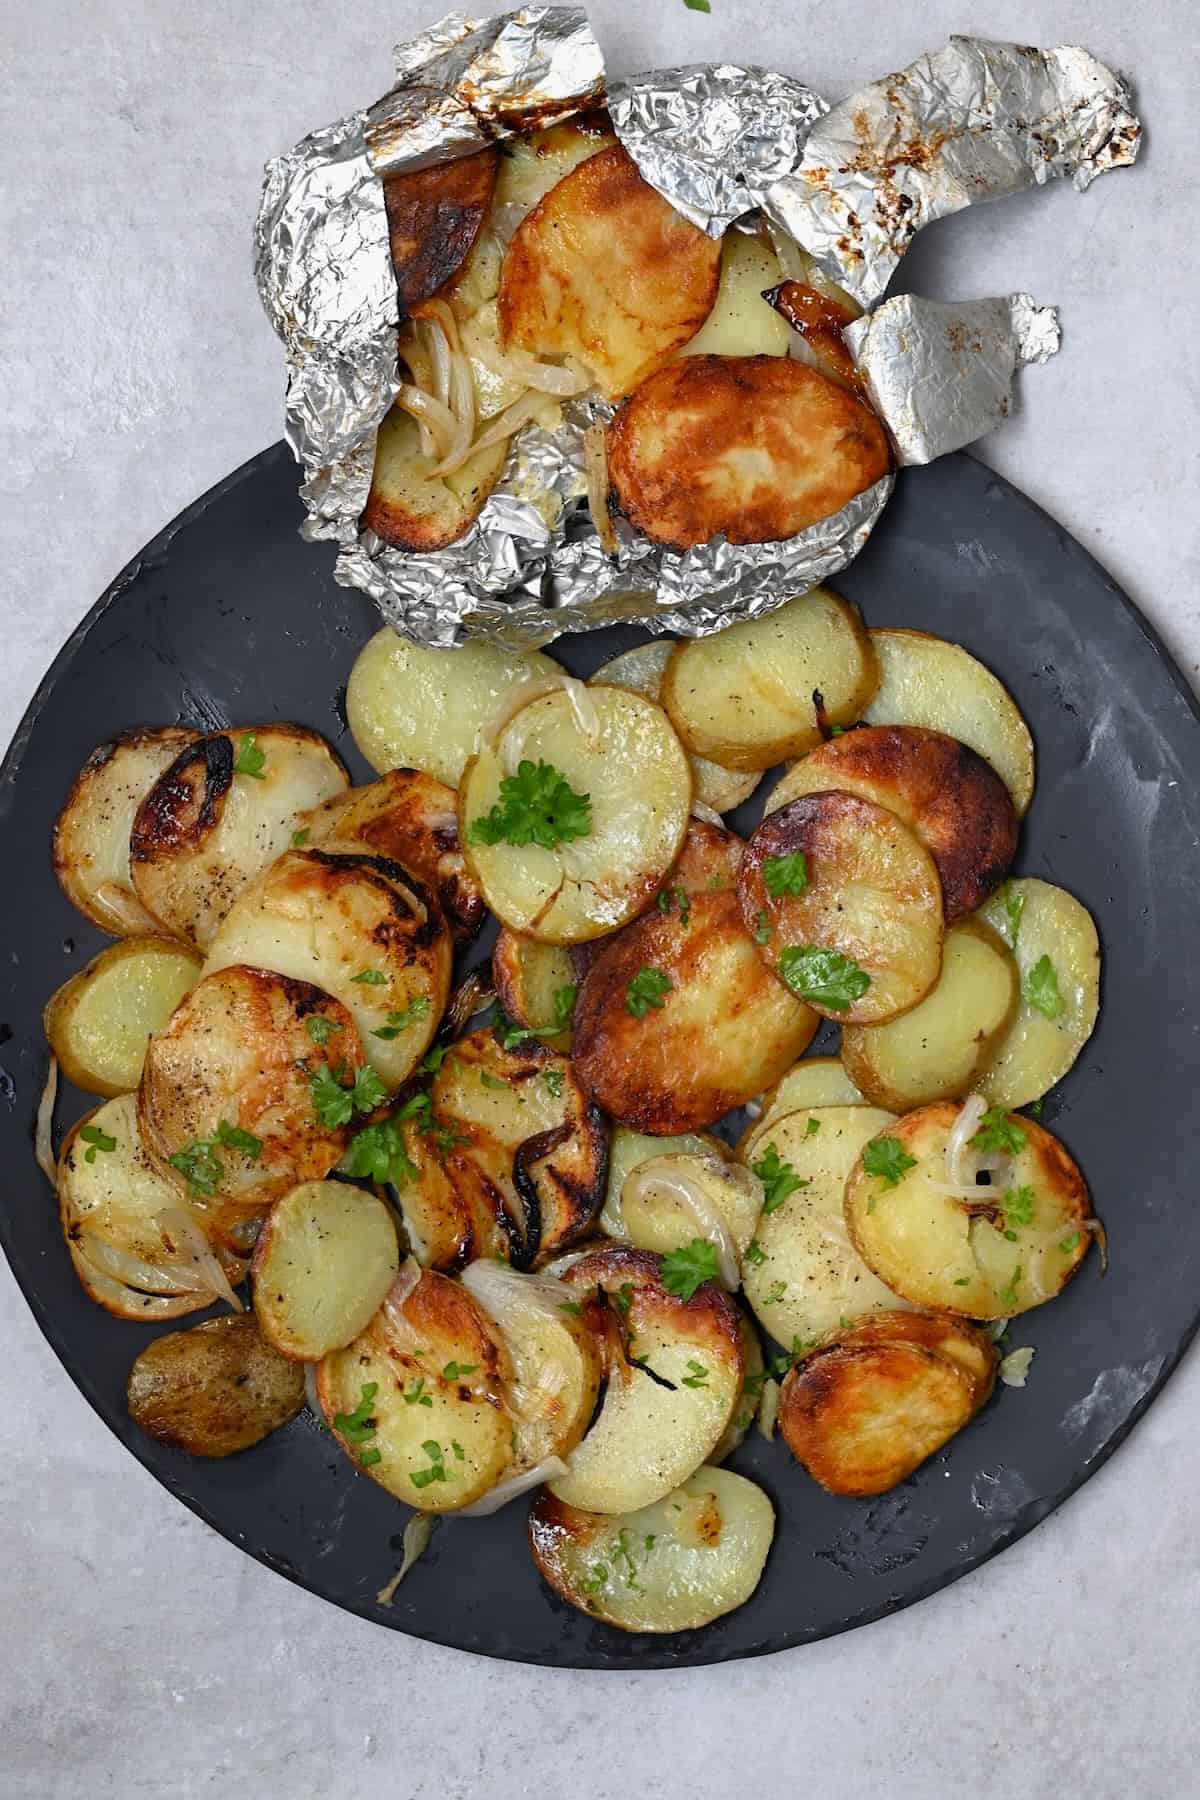 A serving of grilled potatoes